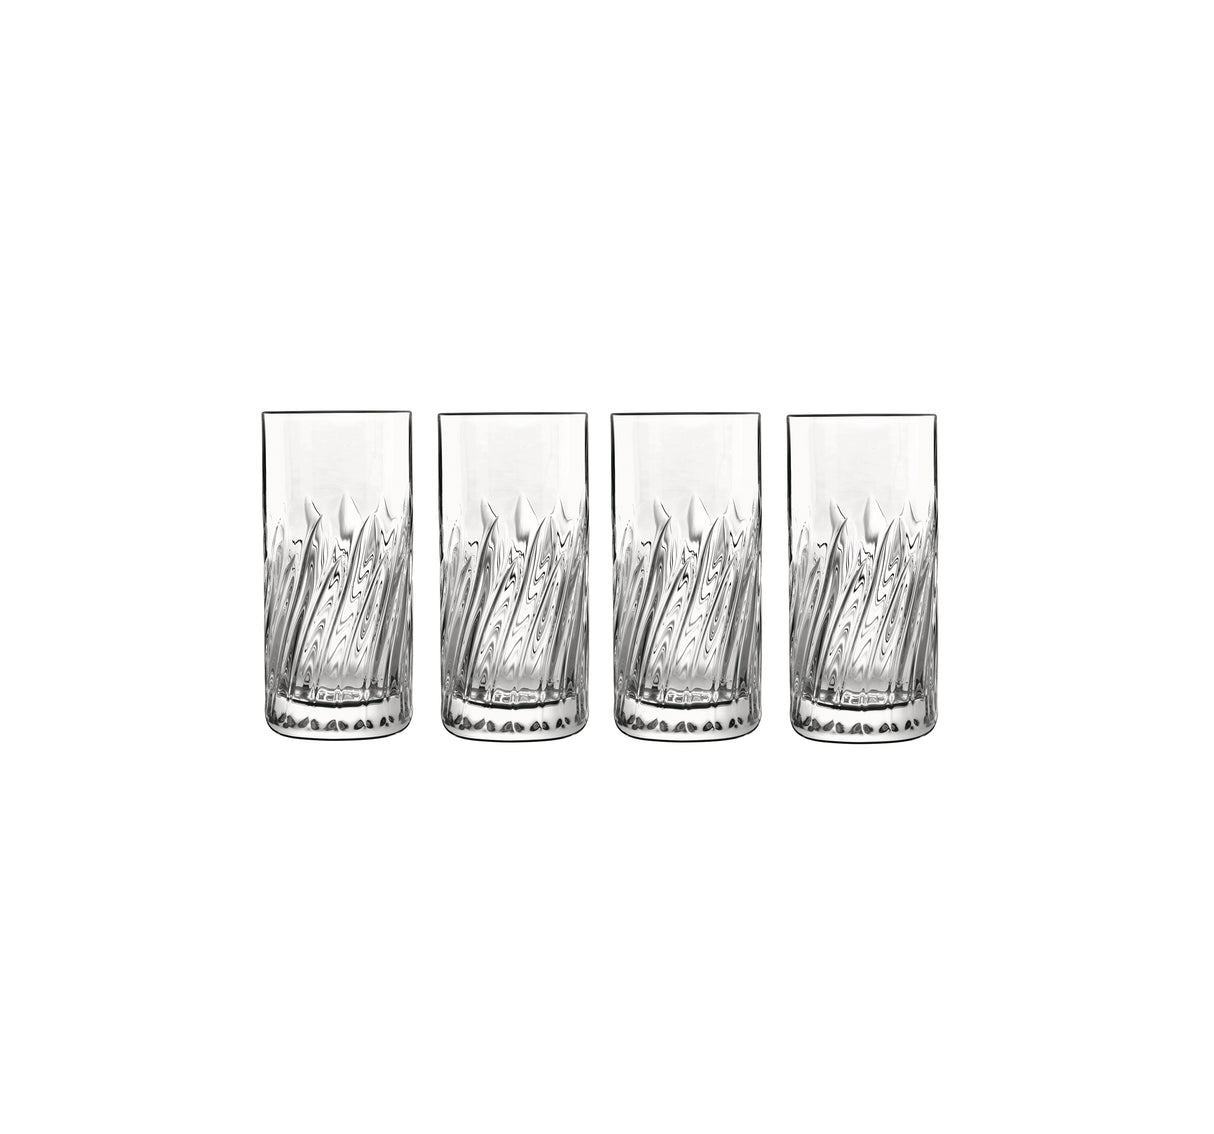 Stylish shot glasses made in Italy